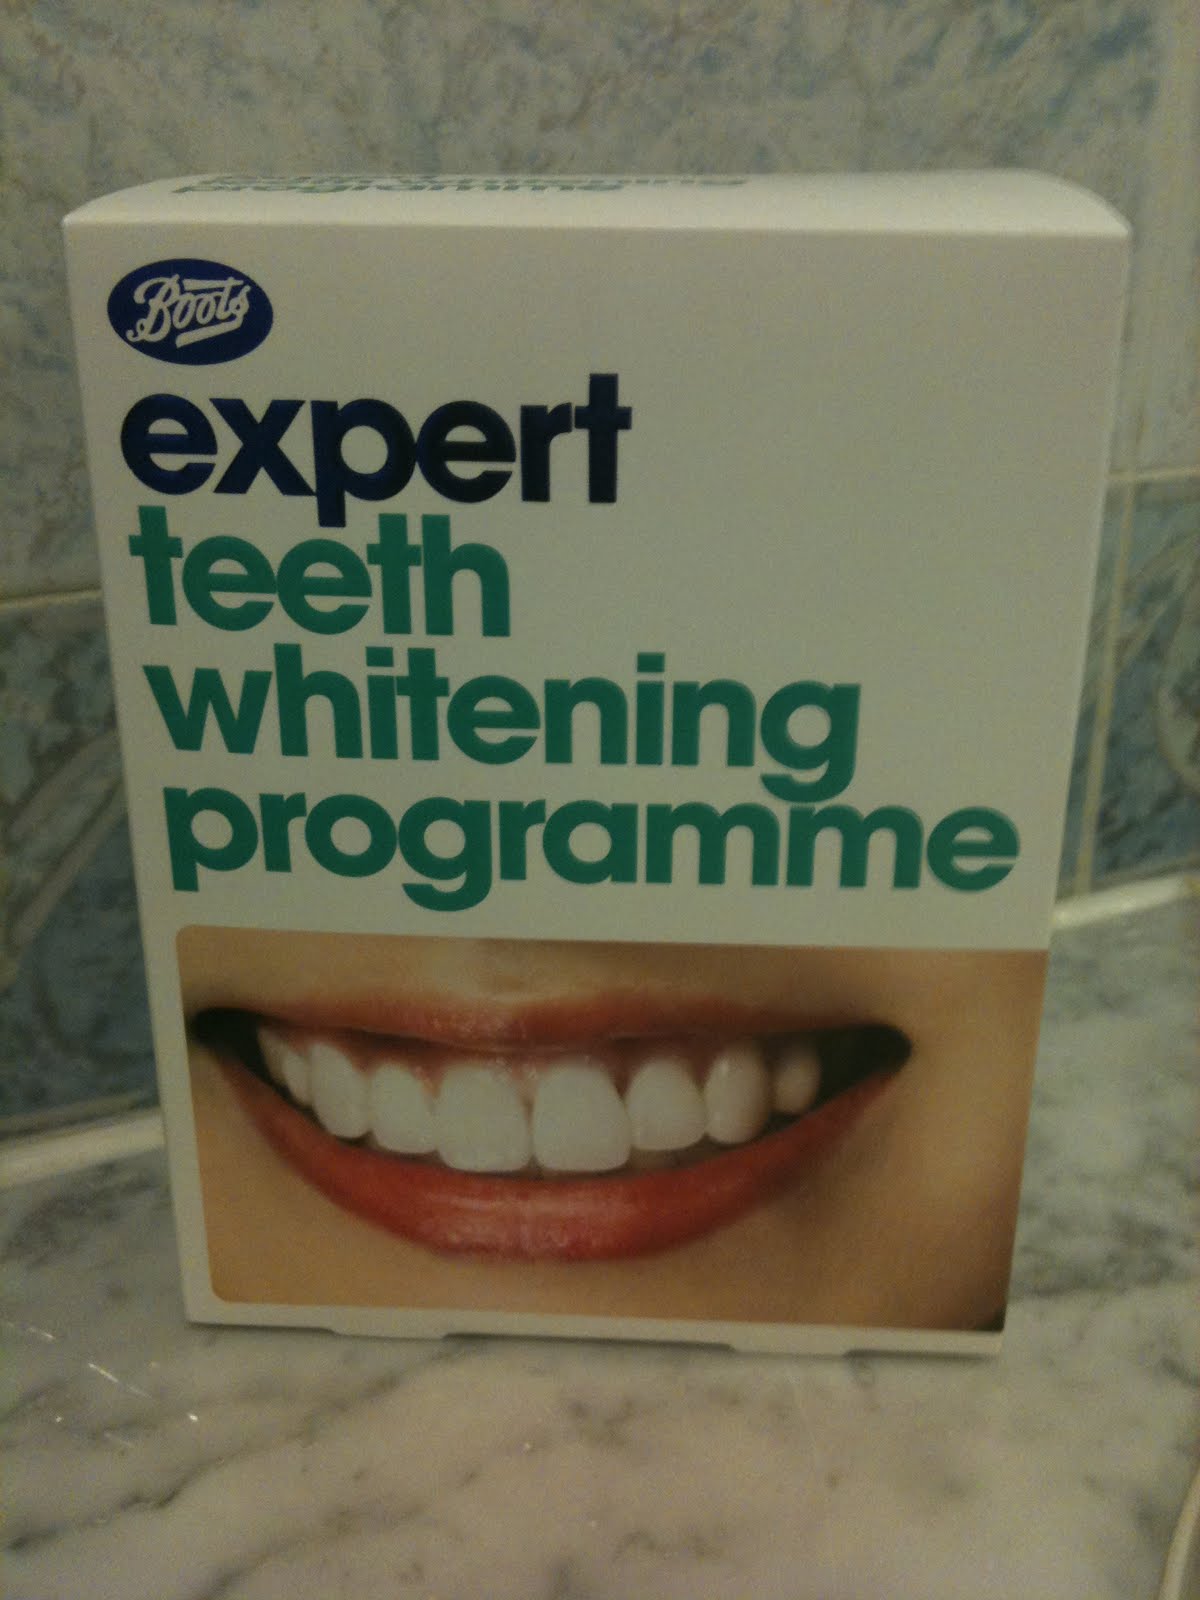 how to use boots expert teeth whitening programme